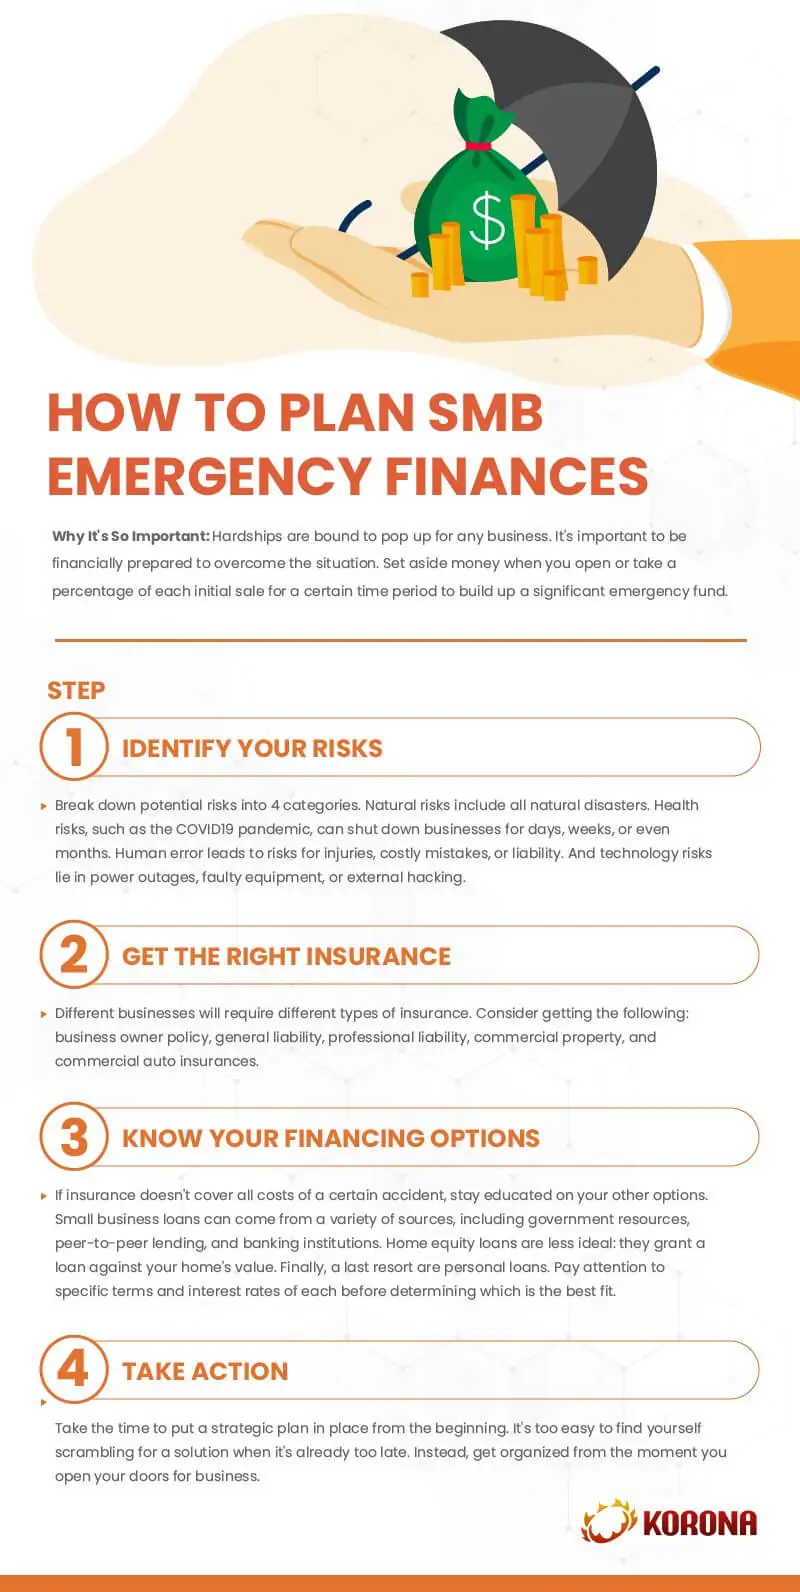 an infographic on how to plan SMB emergency finances